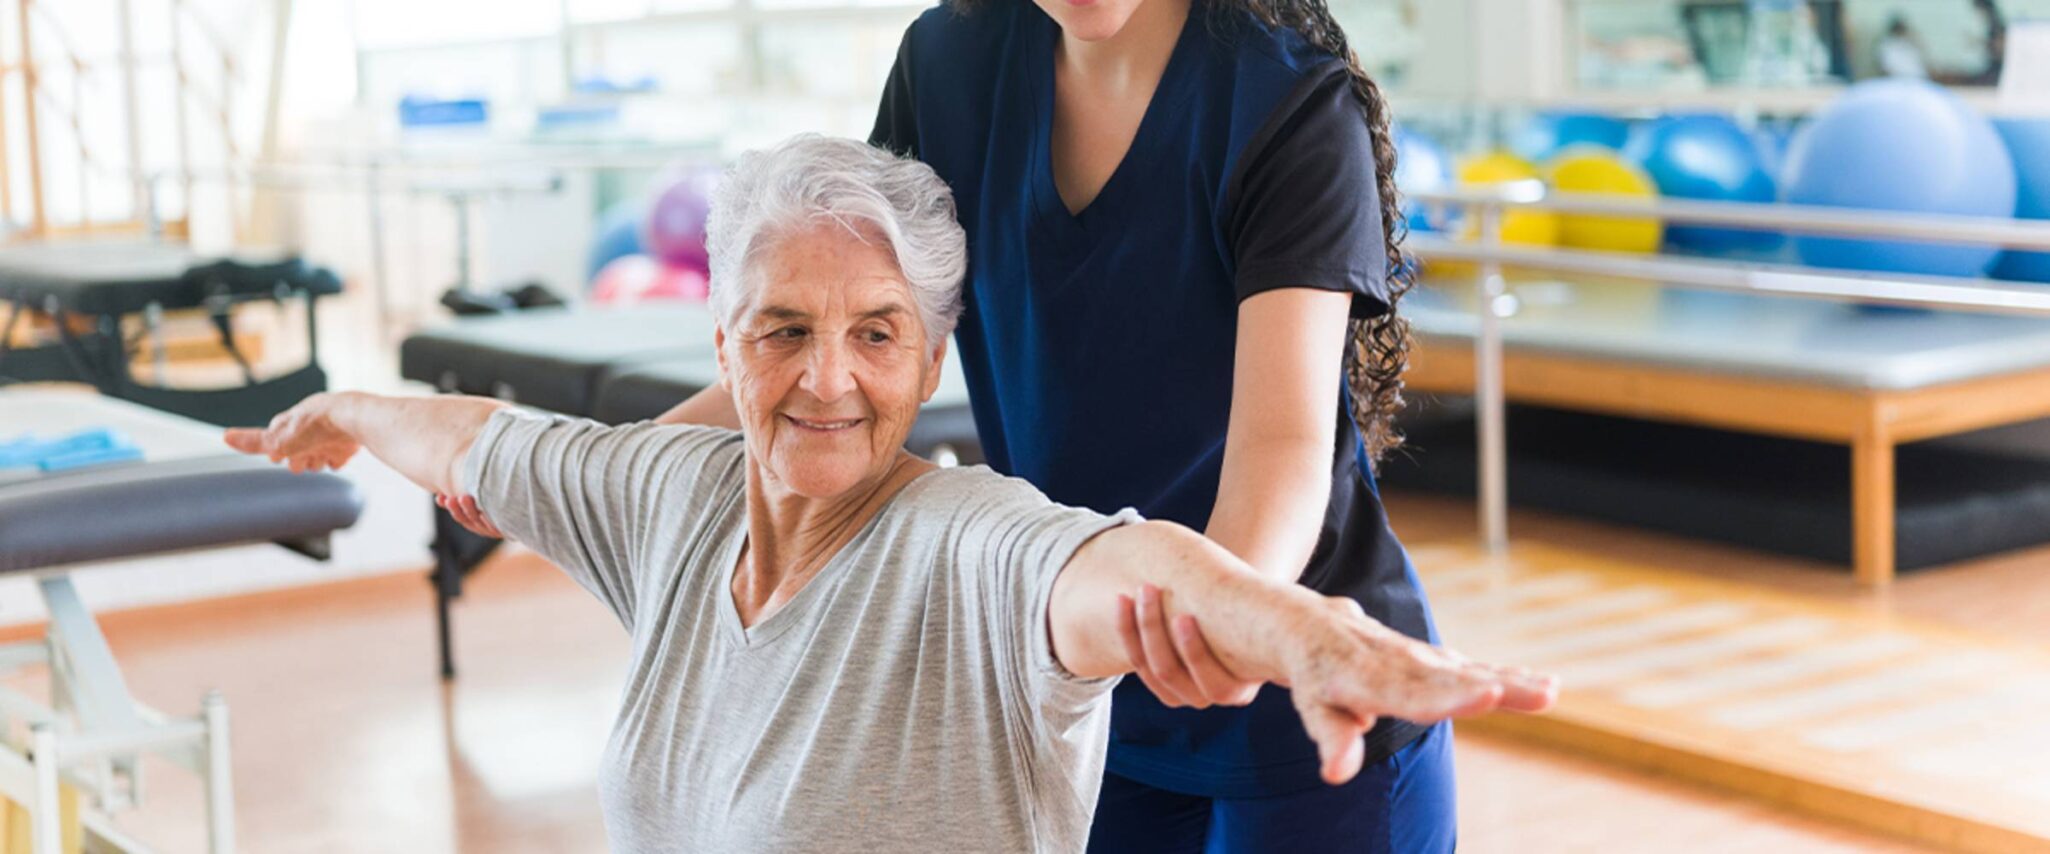 An occupational therapist helps a senior woman